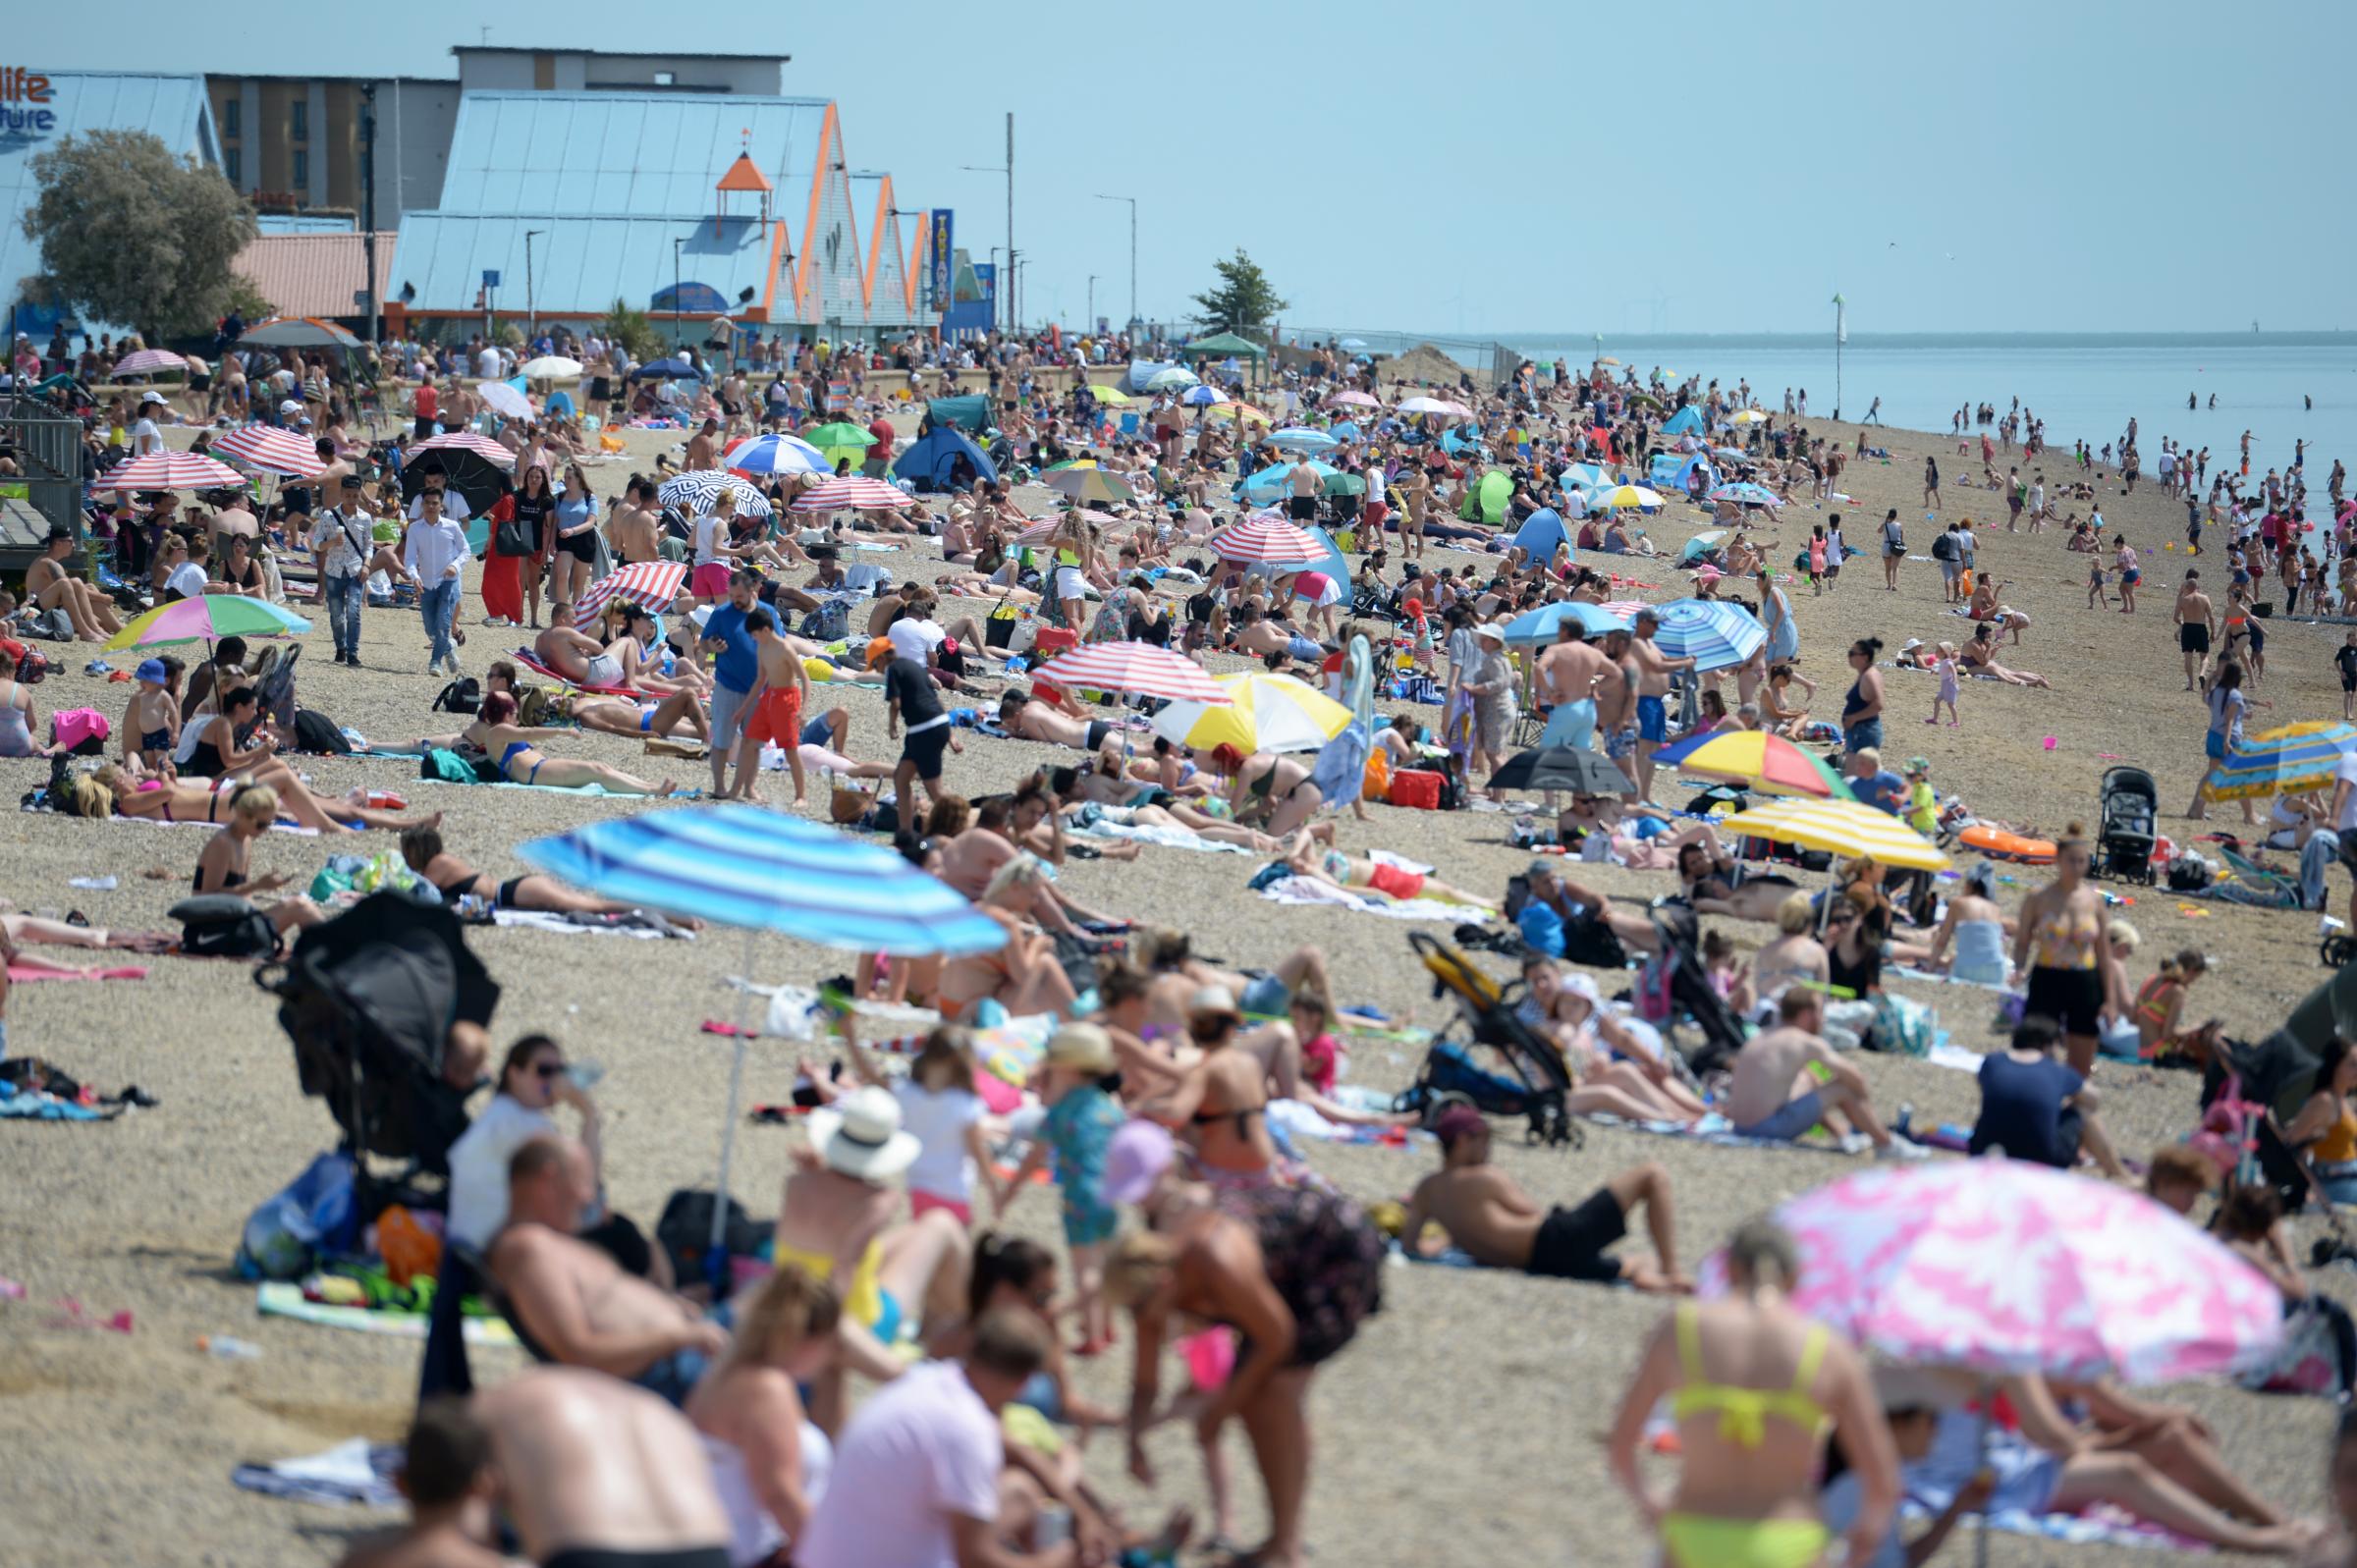 People enjoying the good weather on the beach at Southend-on-Sea in Essex, as the public are being reminded to practice social distancing following the relaxation of lockdown restrictions in England..